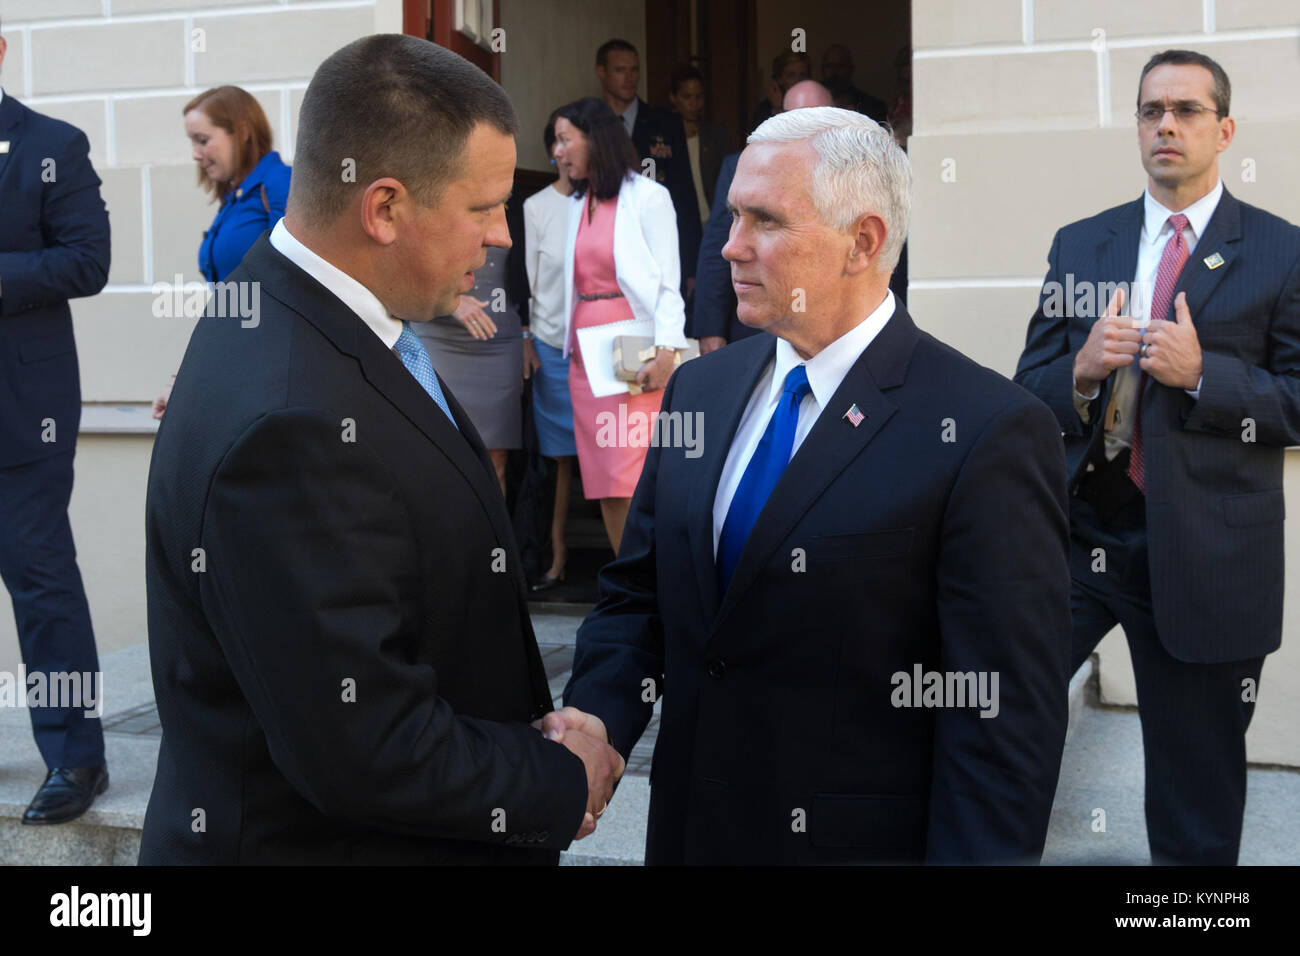 Vice President Mike Pence and Estonian Prime Minister Jüri Ratas | July 30, 2017 (Official White House Photo by D. Myles Cullen) Vice President Pence's Trip to Europe 36120919822 o Stock Photo